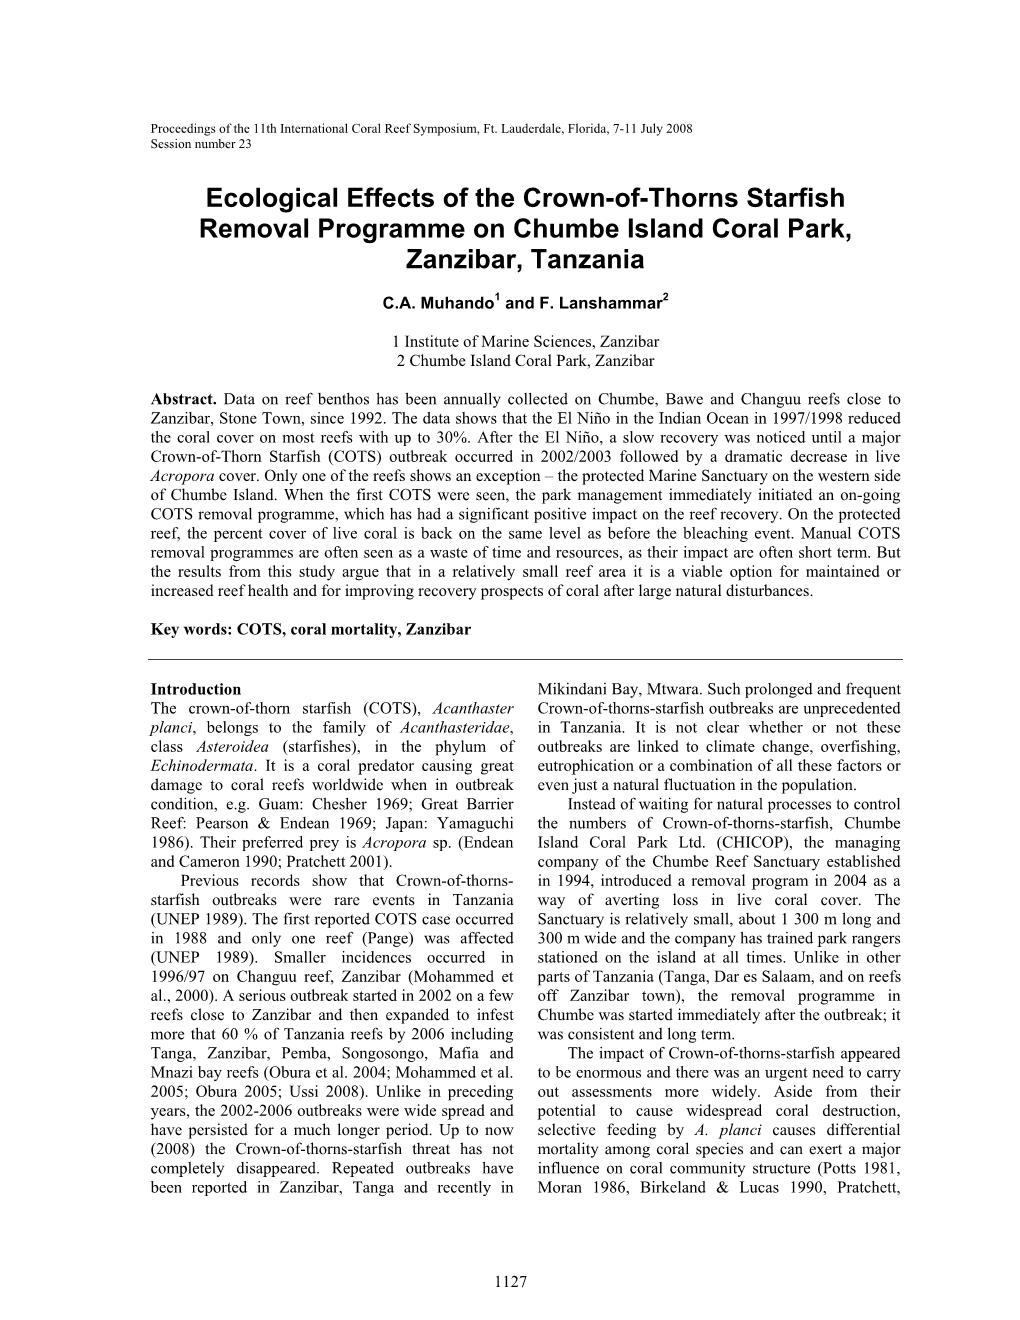 Ecological Effects of the Crown-Of-Thorns Starfish Removal Programme on Chumbe Island Coral Park, Zanzibar, Tanzania